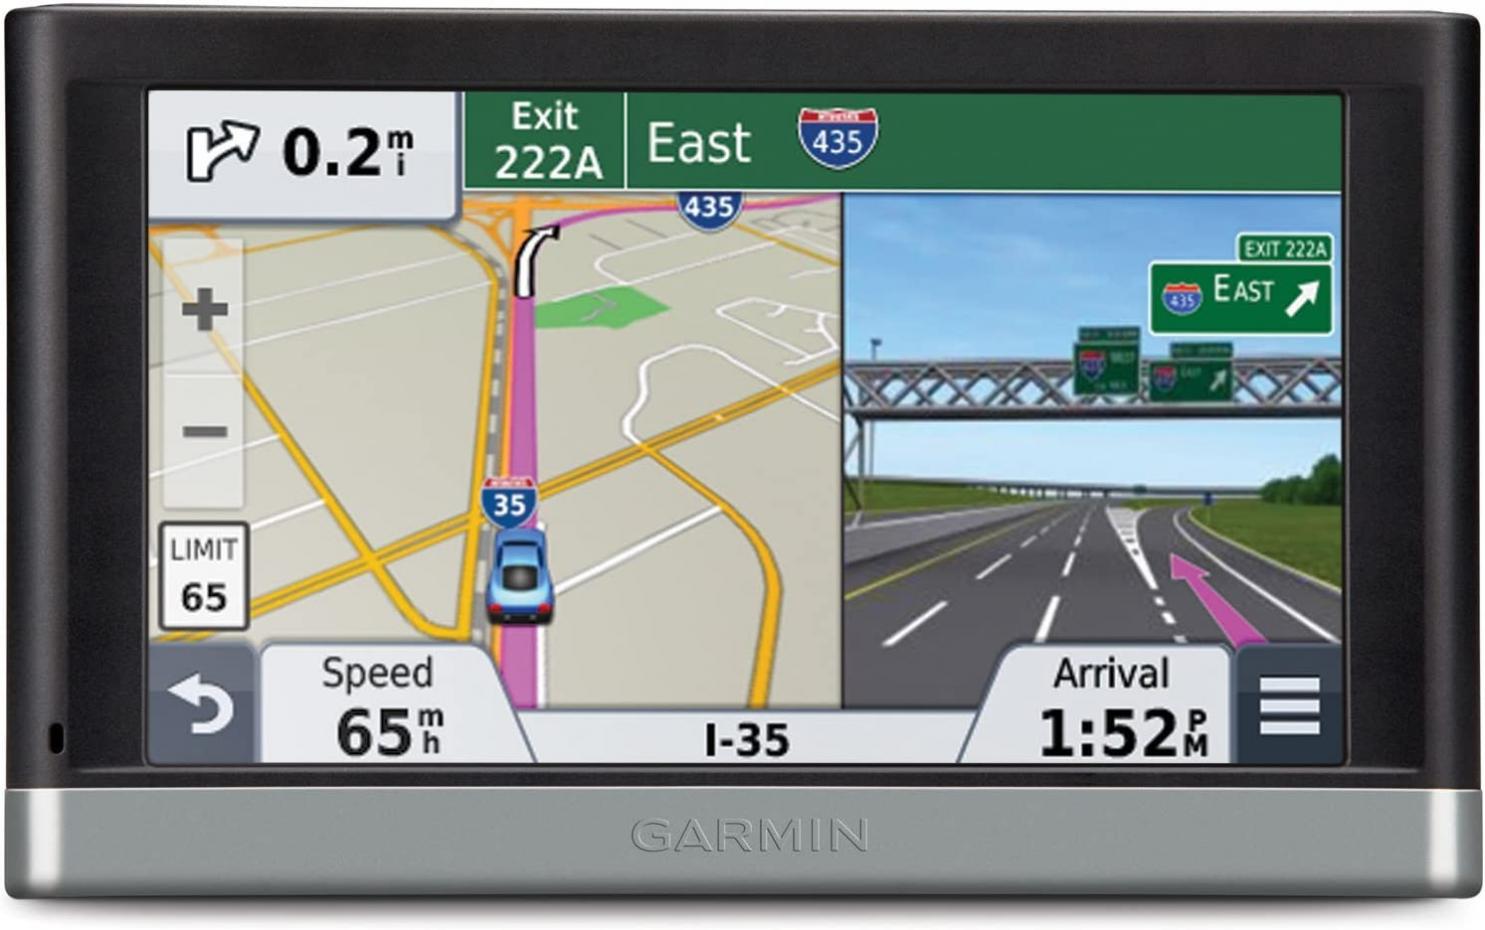 Garmin nüvi 2557LMT 5-Inch Portable Vehicle GPS with Lifetime Maps and Traffic (Discontinued by Manufacturer) (Renewed)